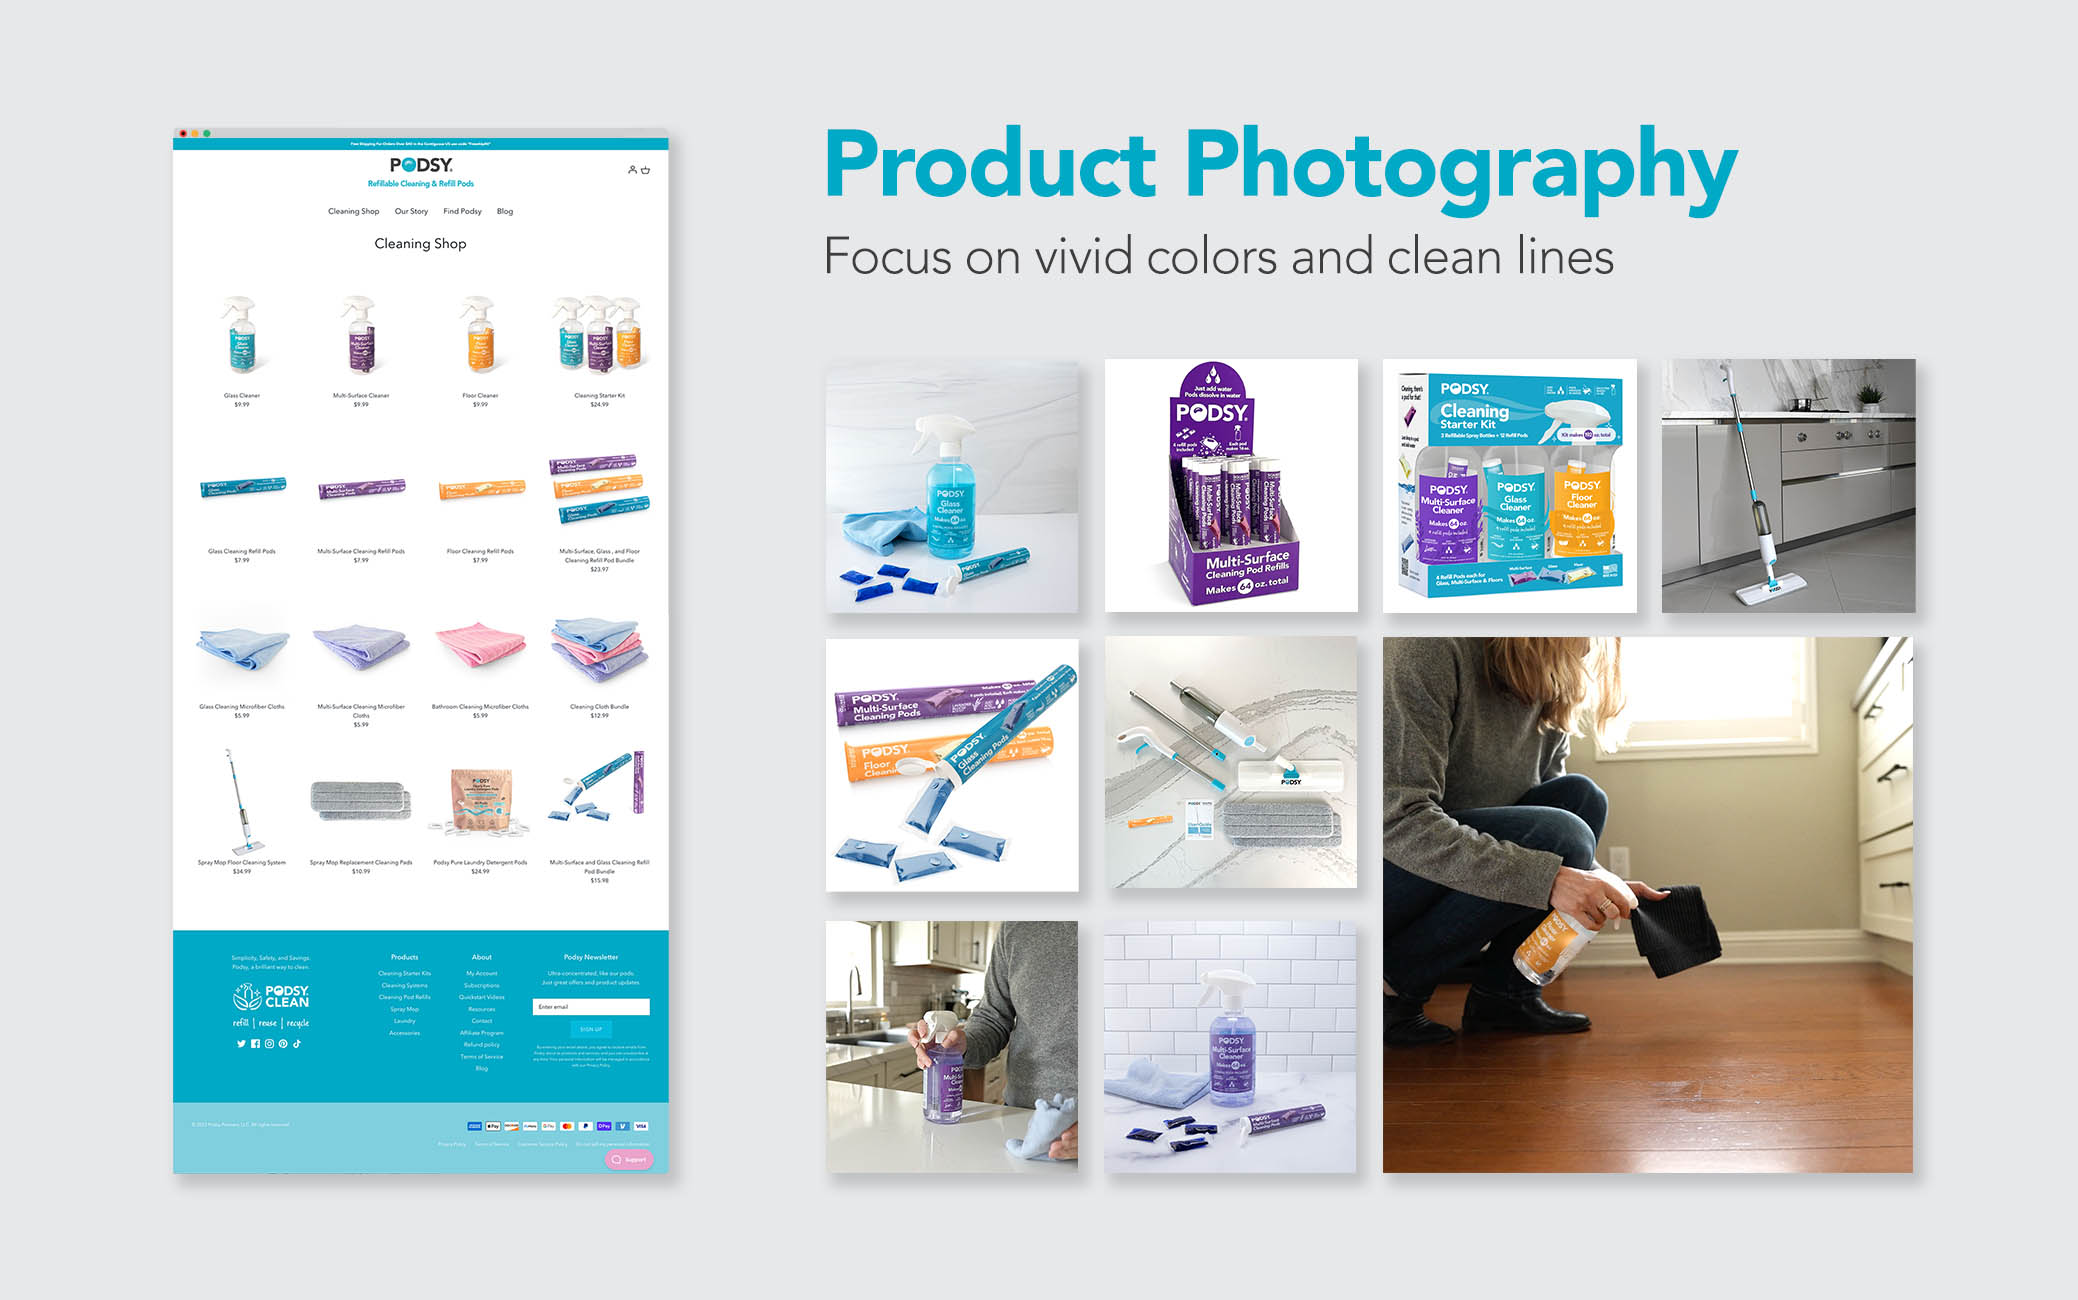 Product Photography - Focus on vivid colors and clean lines